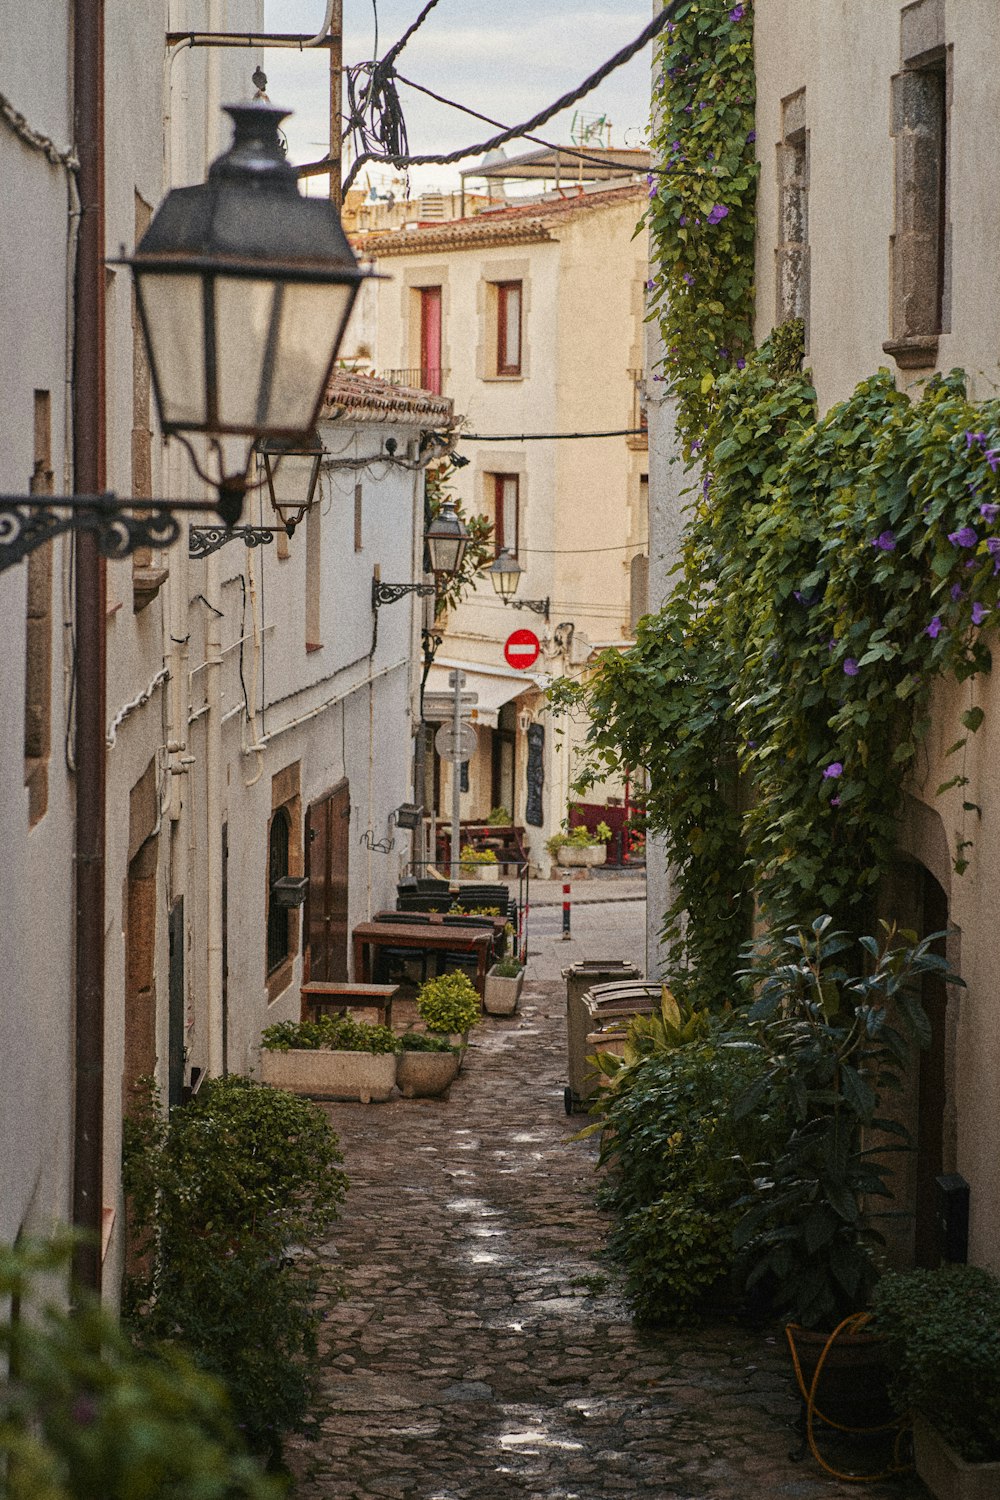 a cobblestone street with a lamp post in the middle